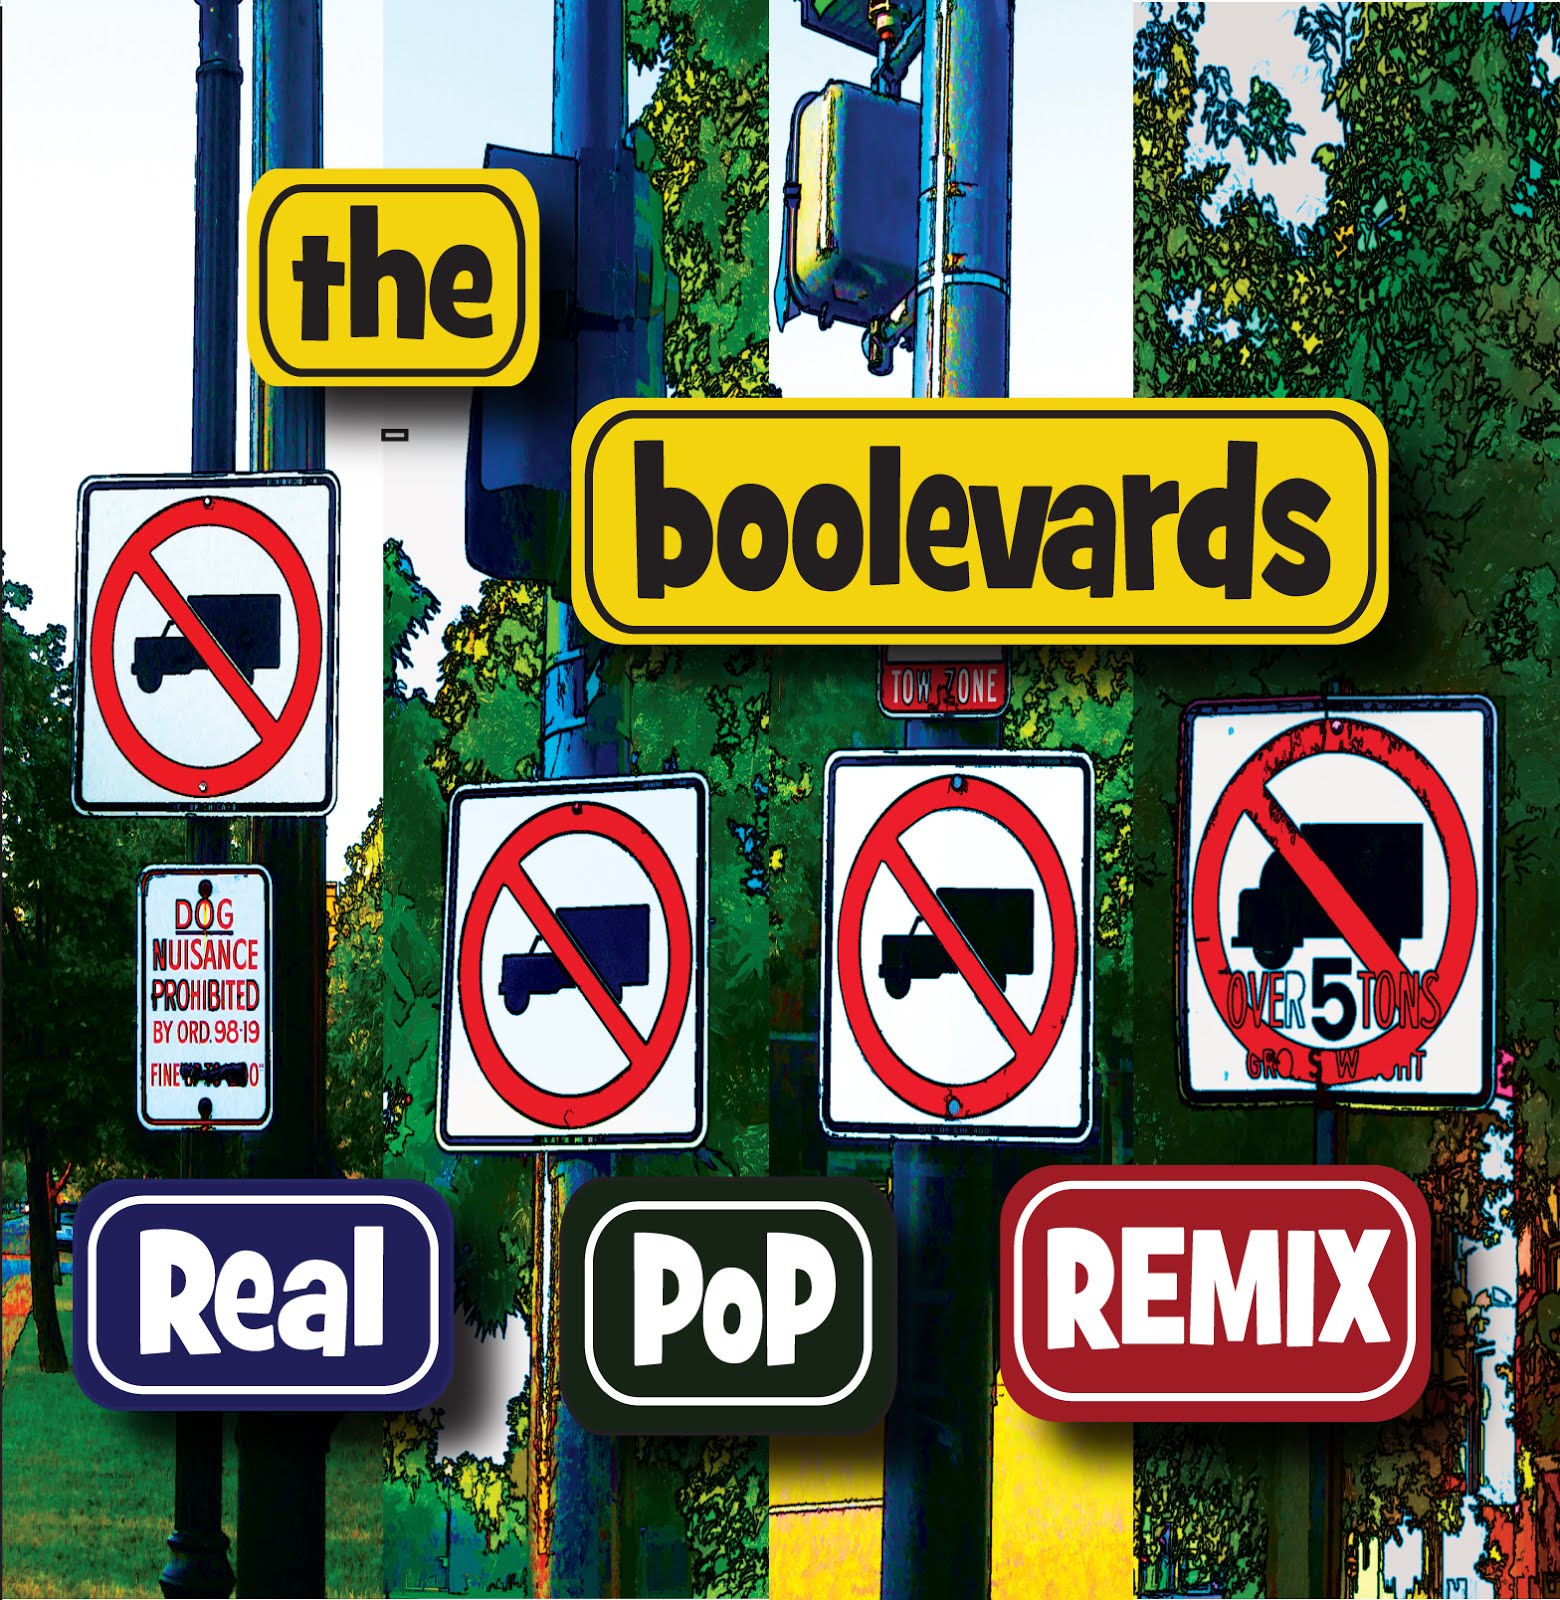 Real Pop REMIX - the boolevards' third CD